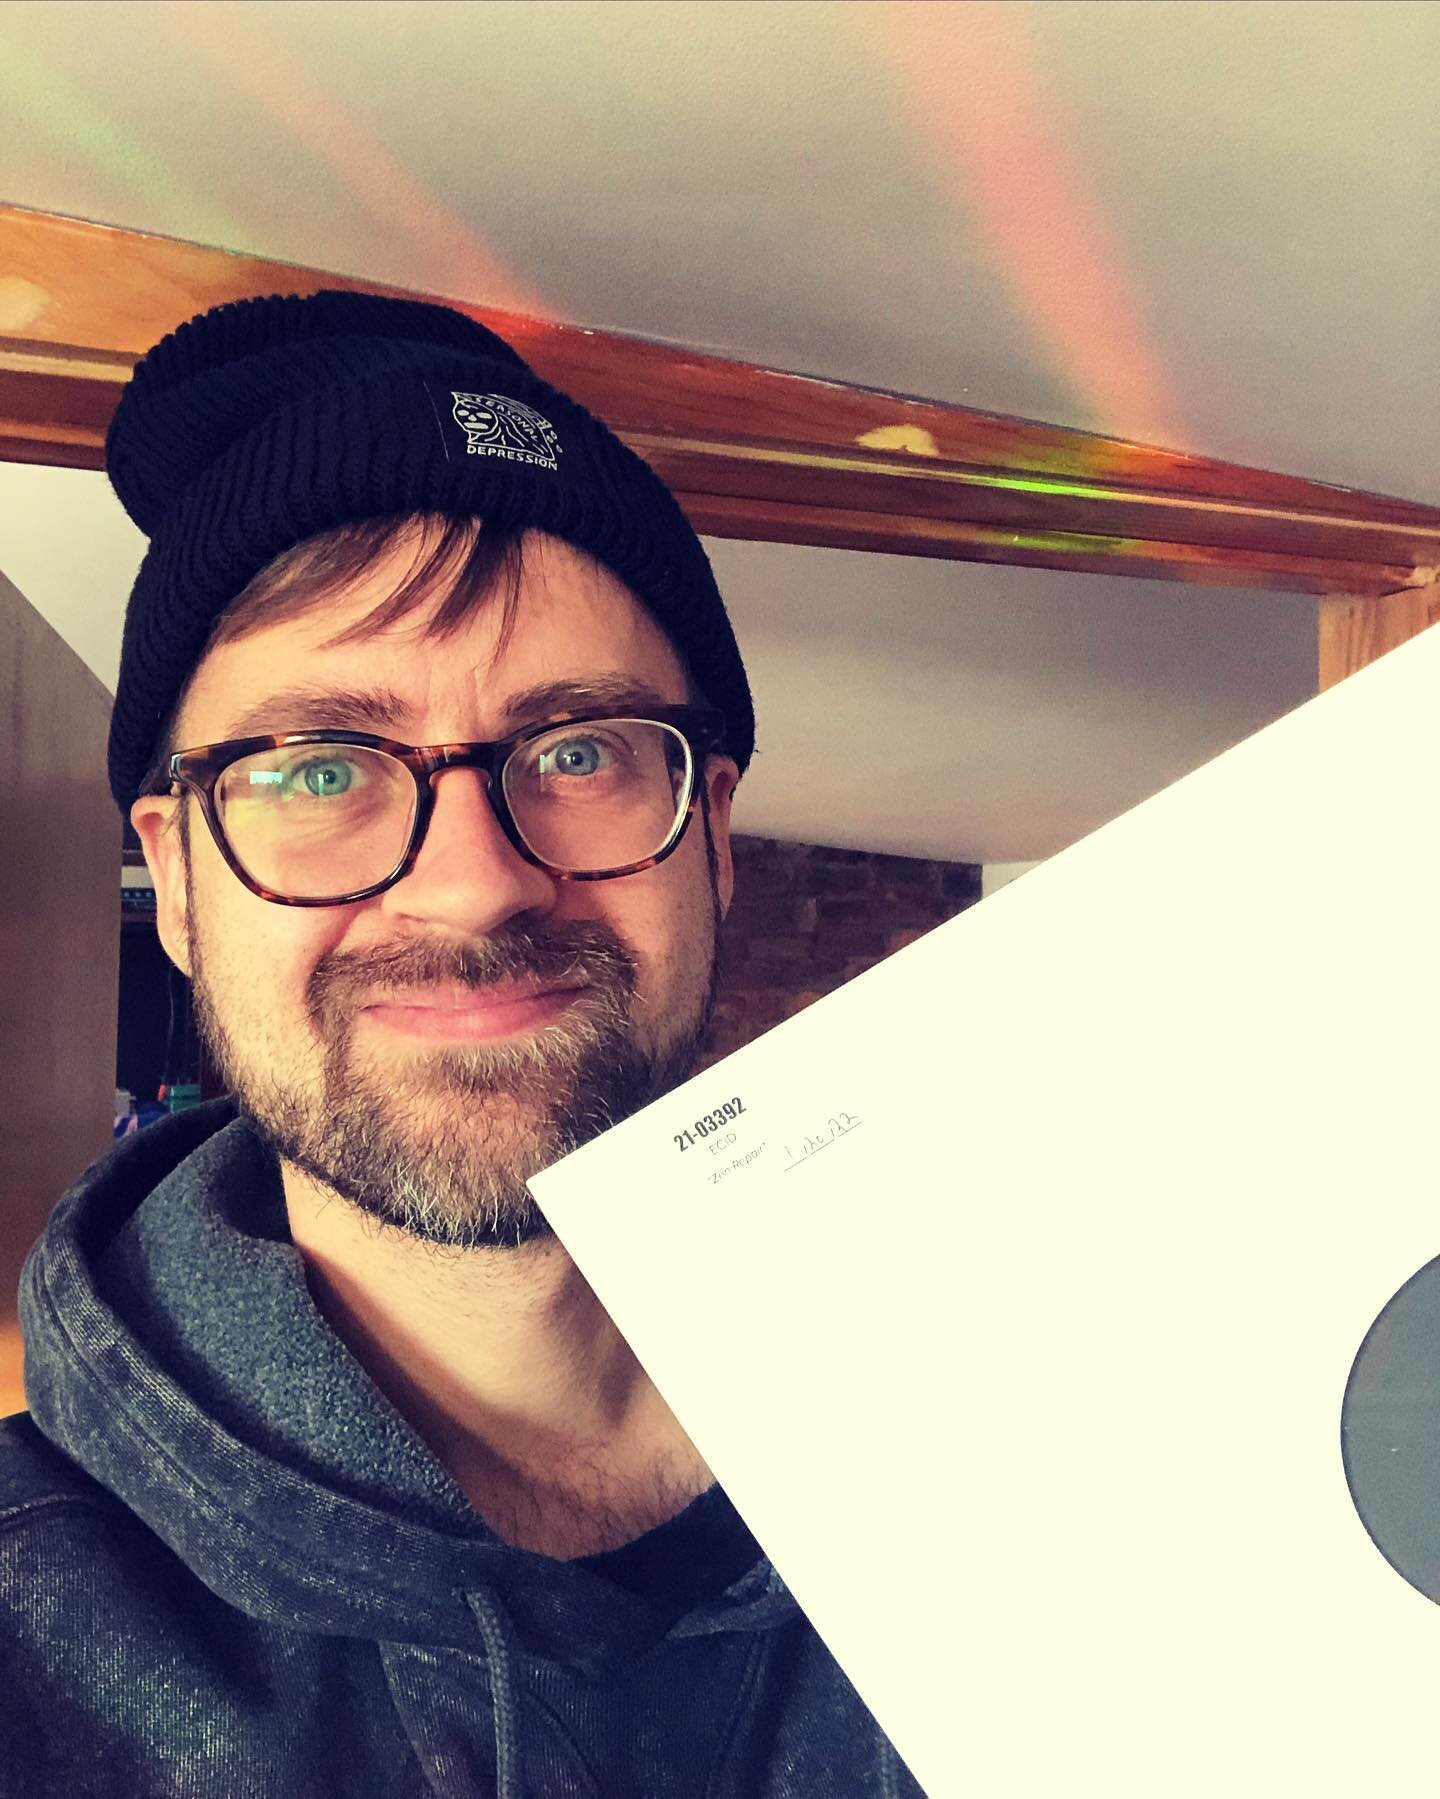 Just got the Zen Repair test pressings in!! Huge thank you to everyone that has pre-ordered a copy so far. I will be updating everyone asap regarding an eta on when these will be ready to ship. Vinyl has been taking forever but really happy we are at